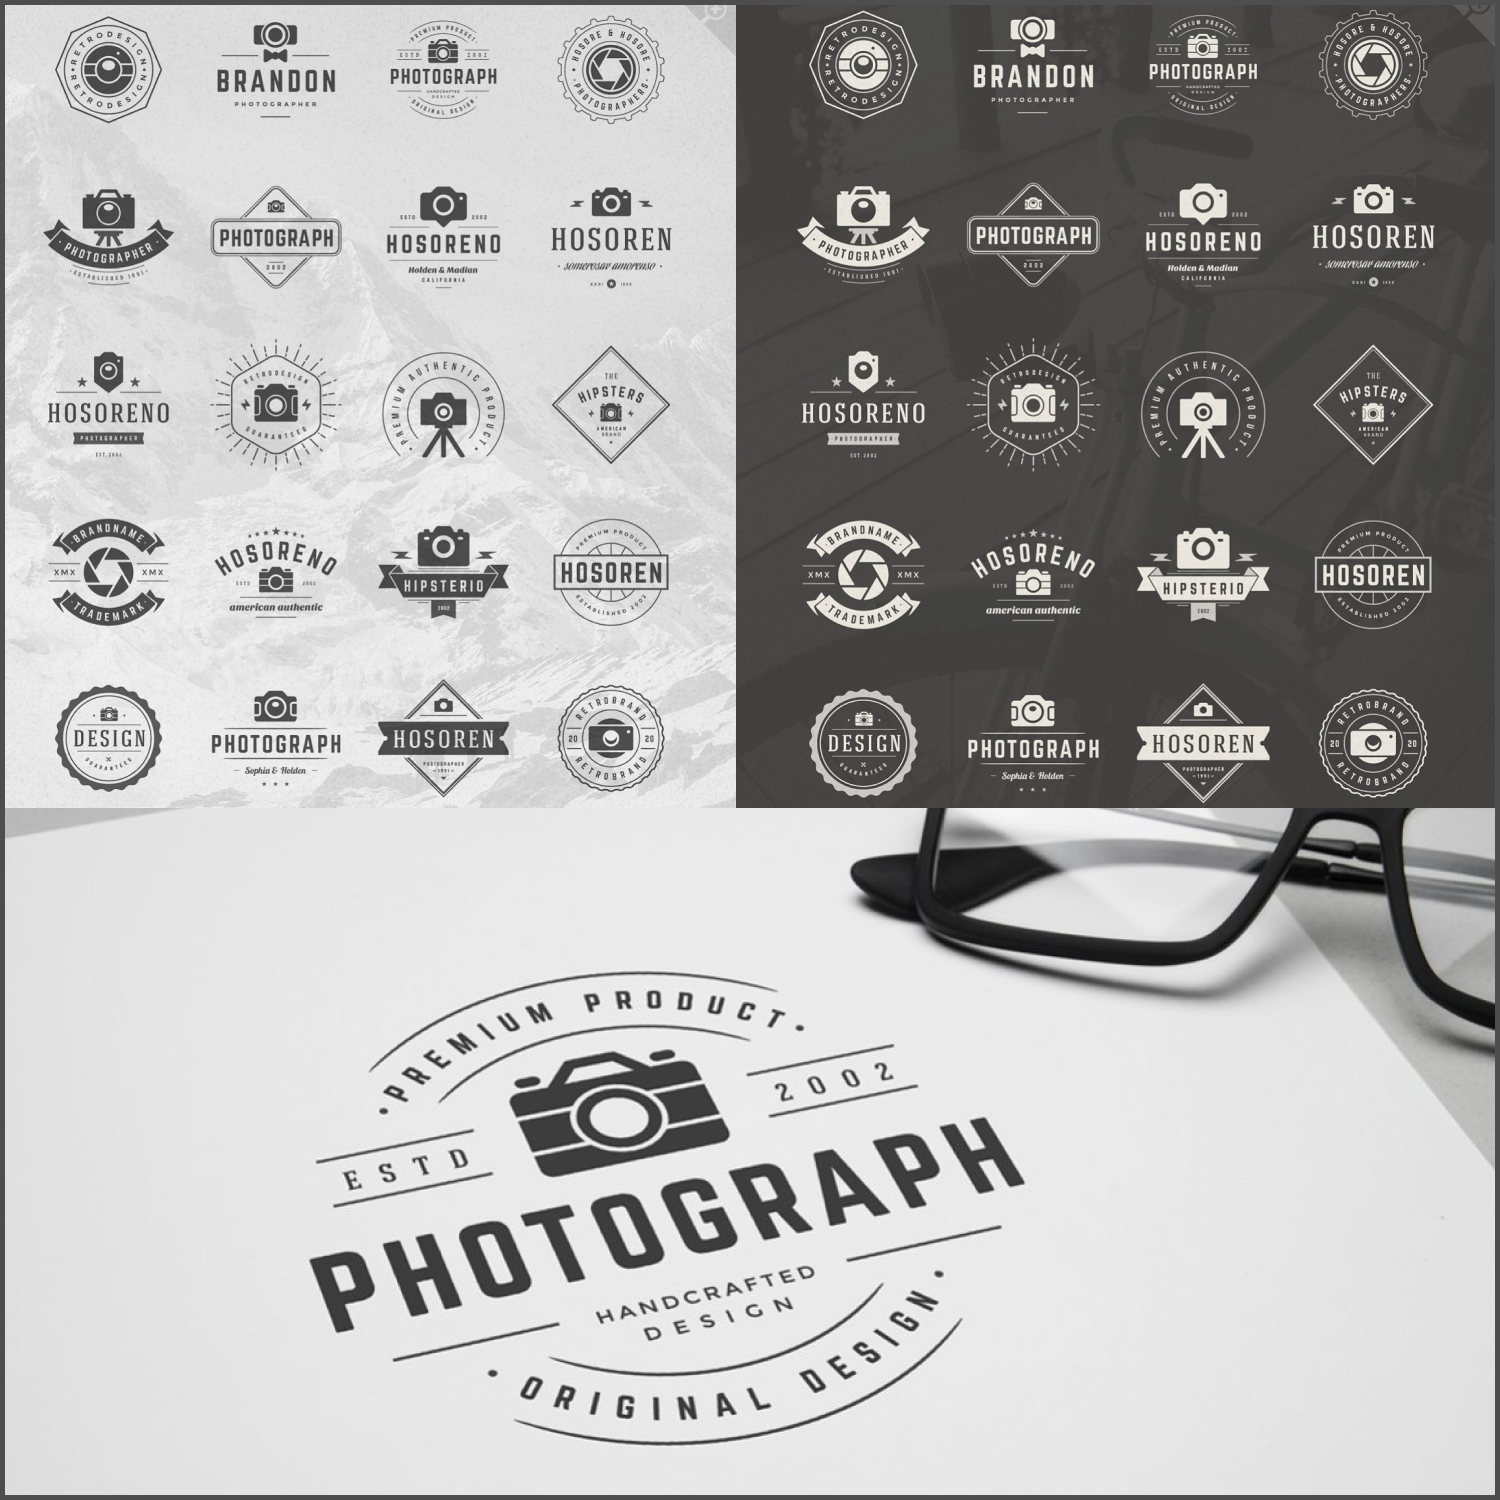 Preview photography logos and badges.